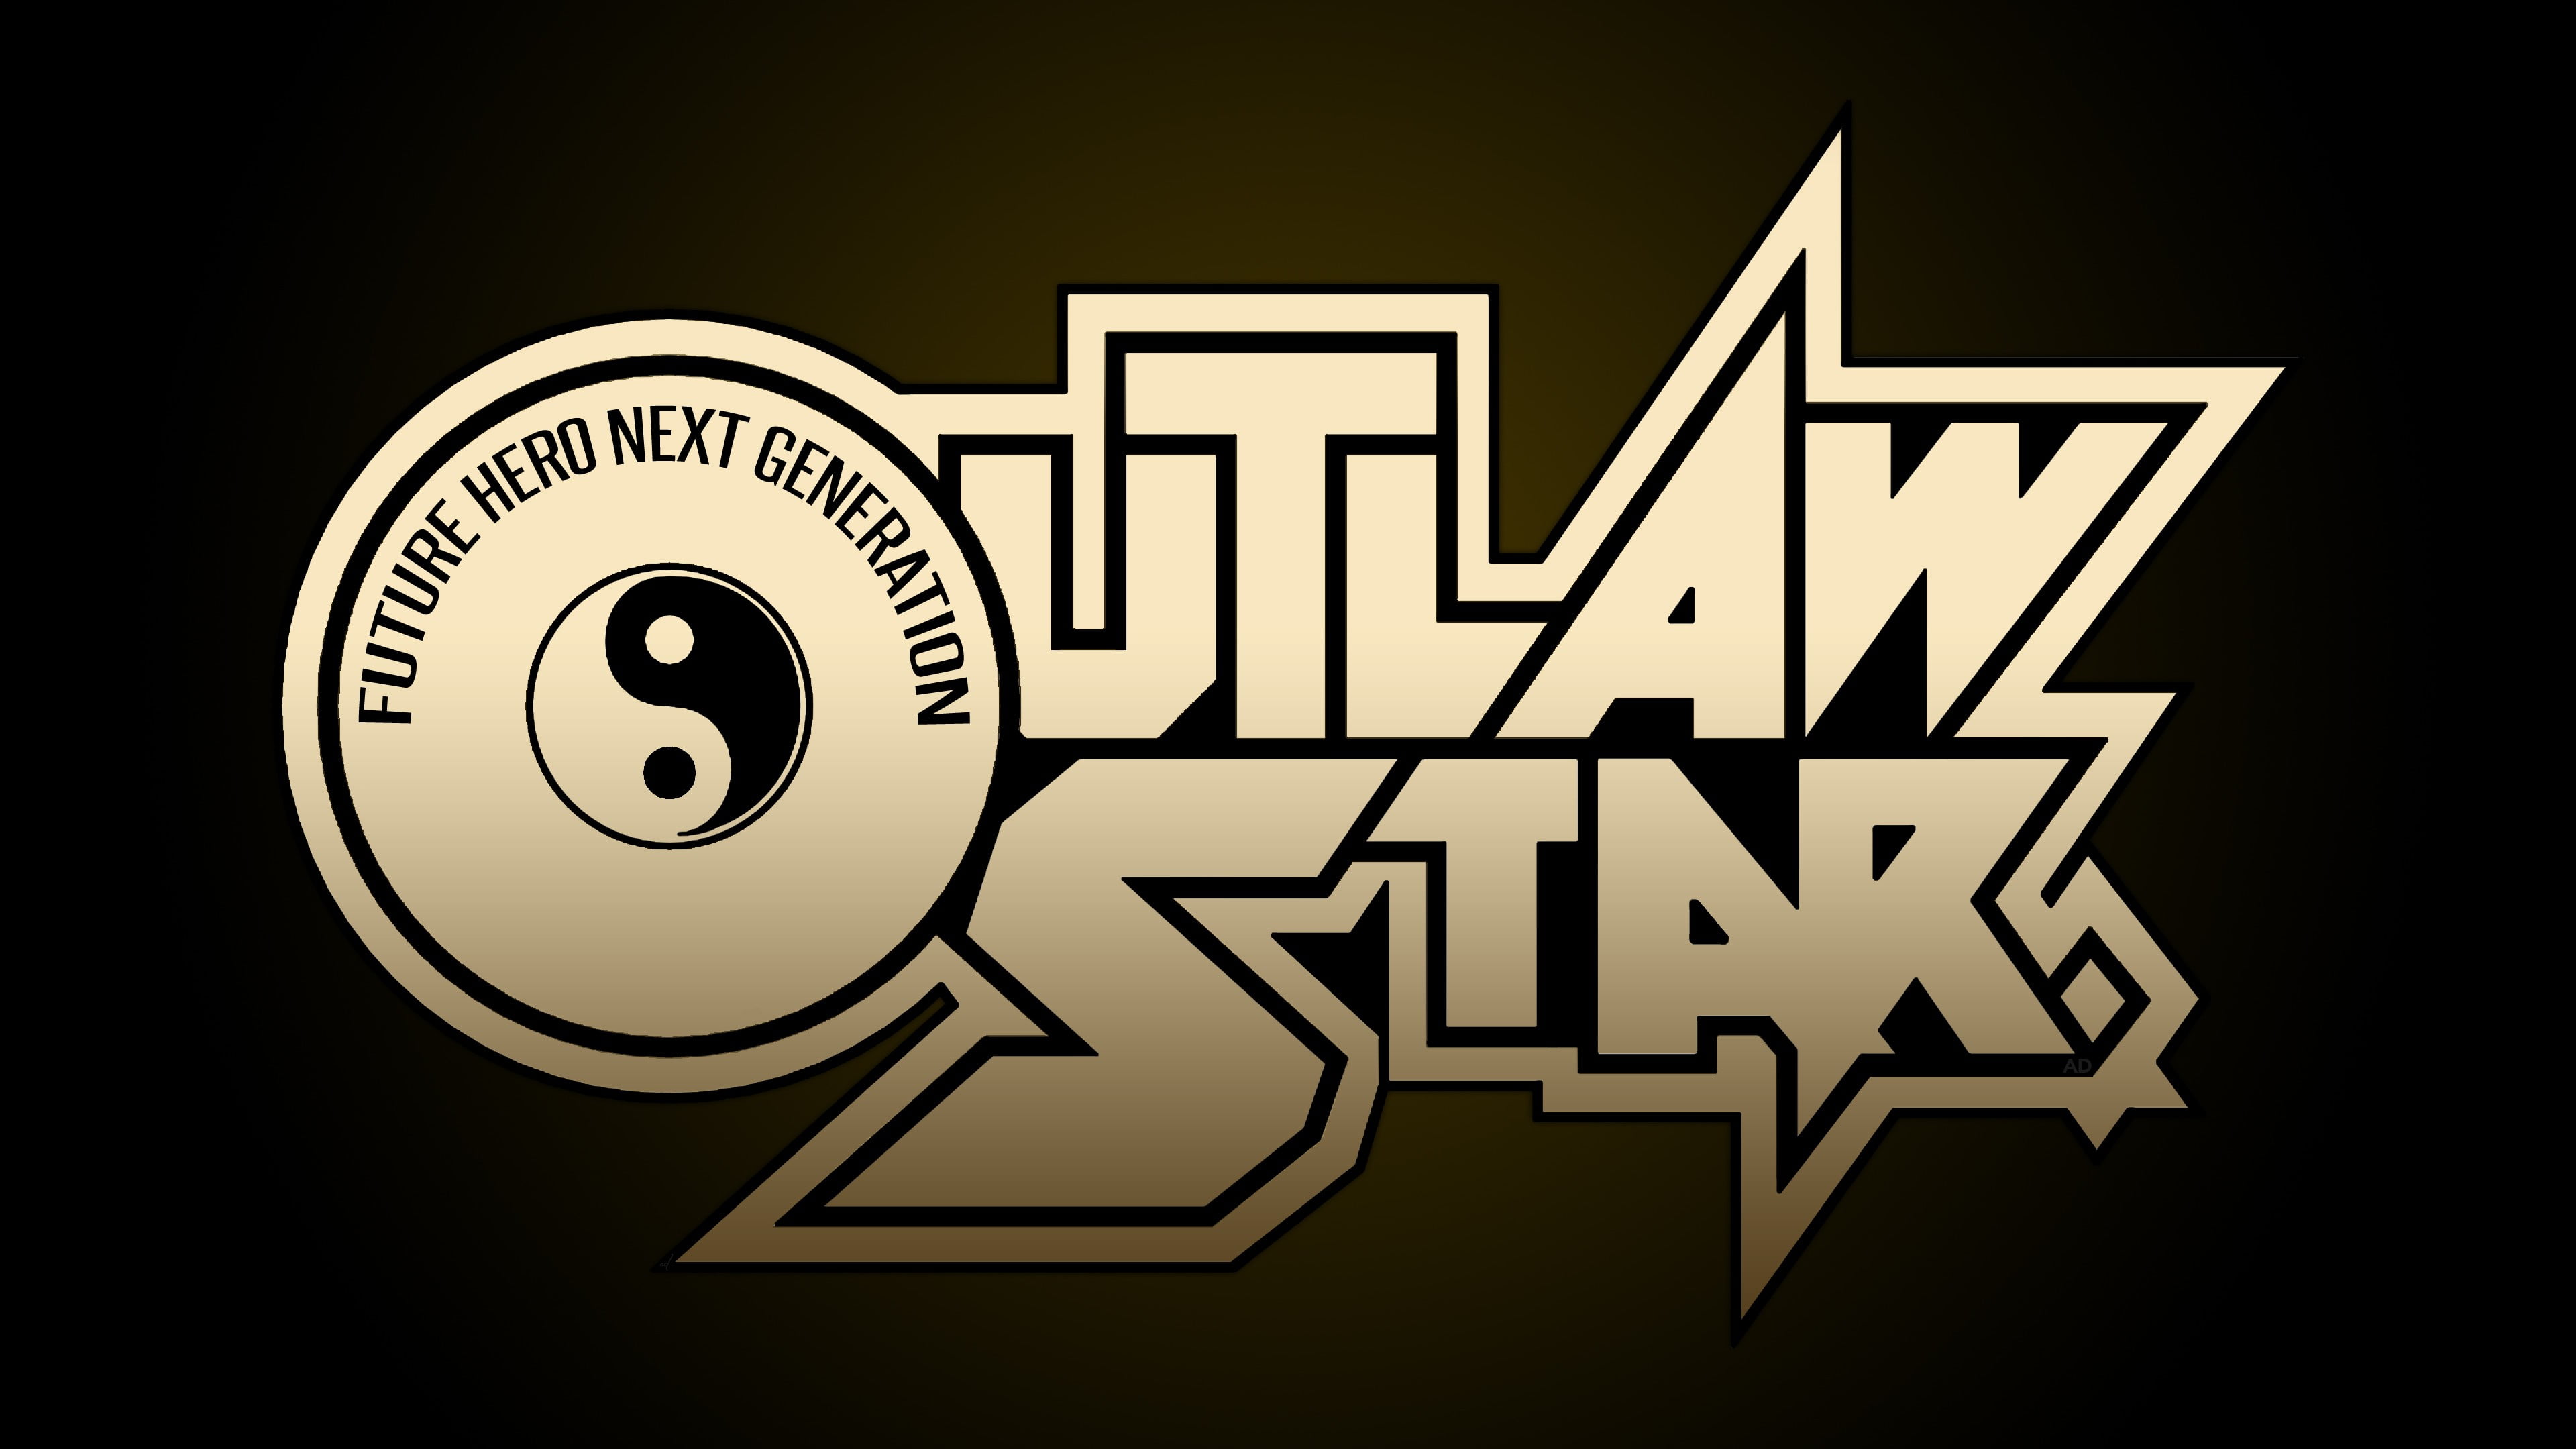 Outlaw Star logo, typography, gradient, anime, black color, communication